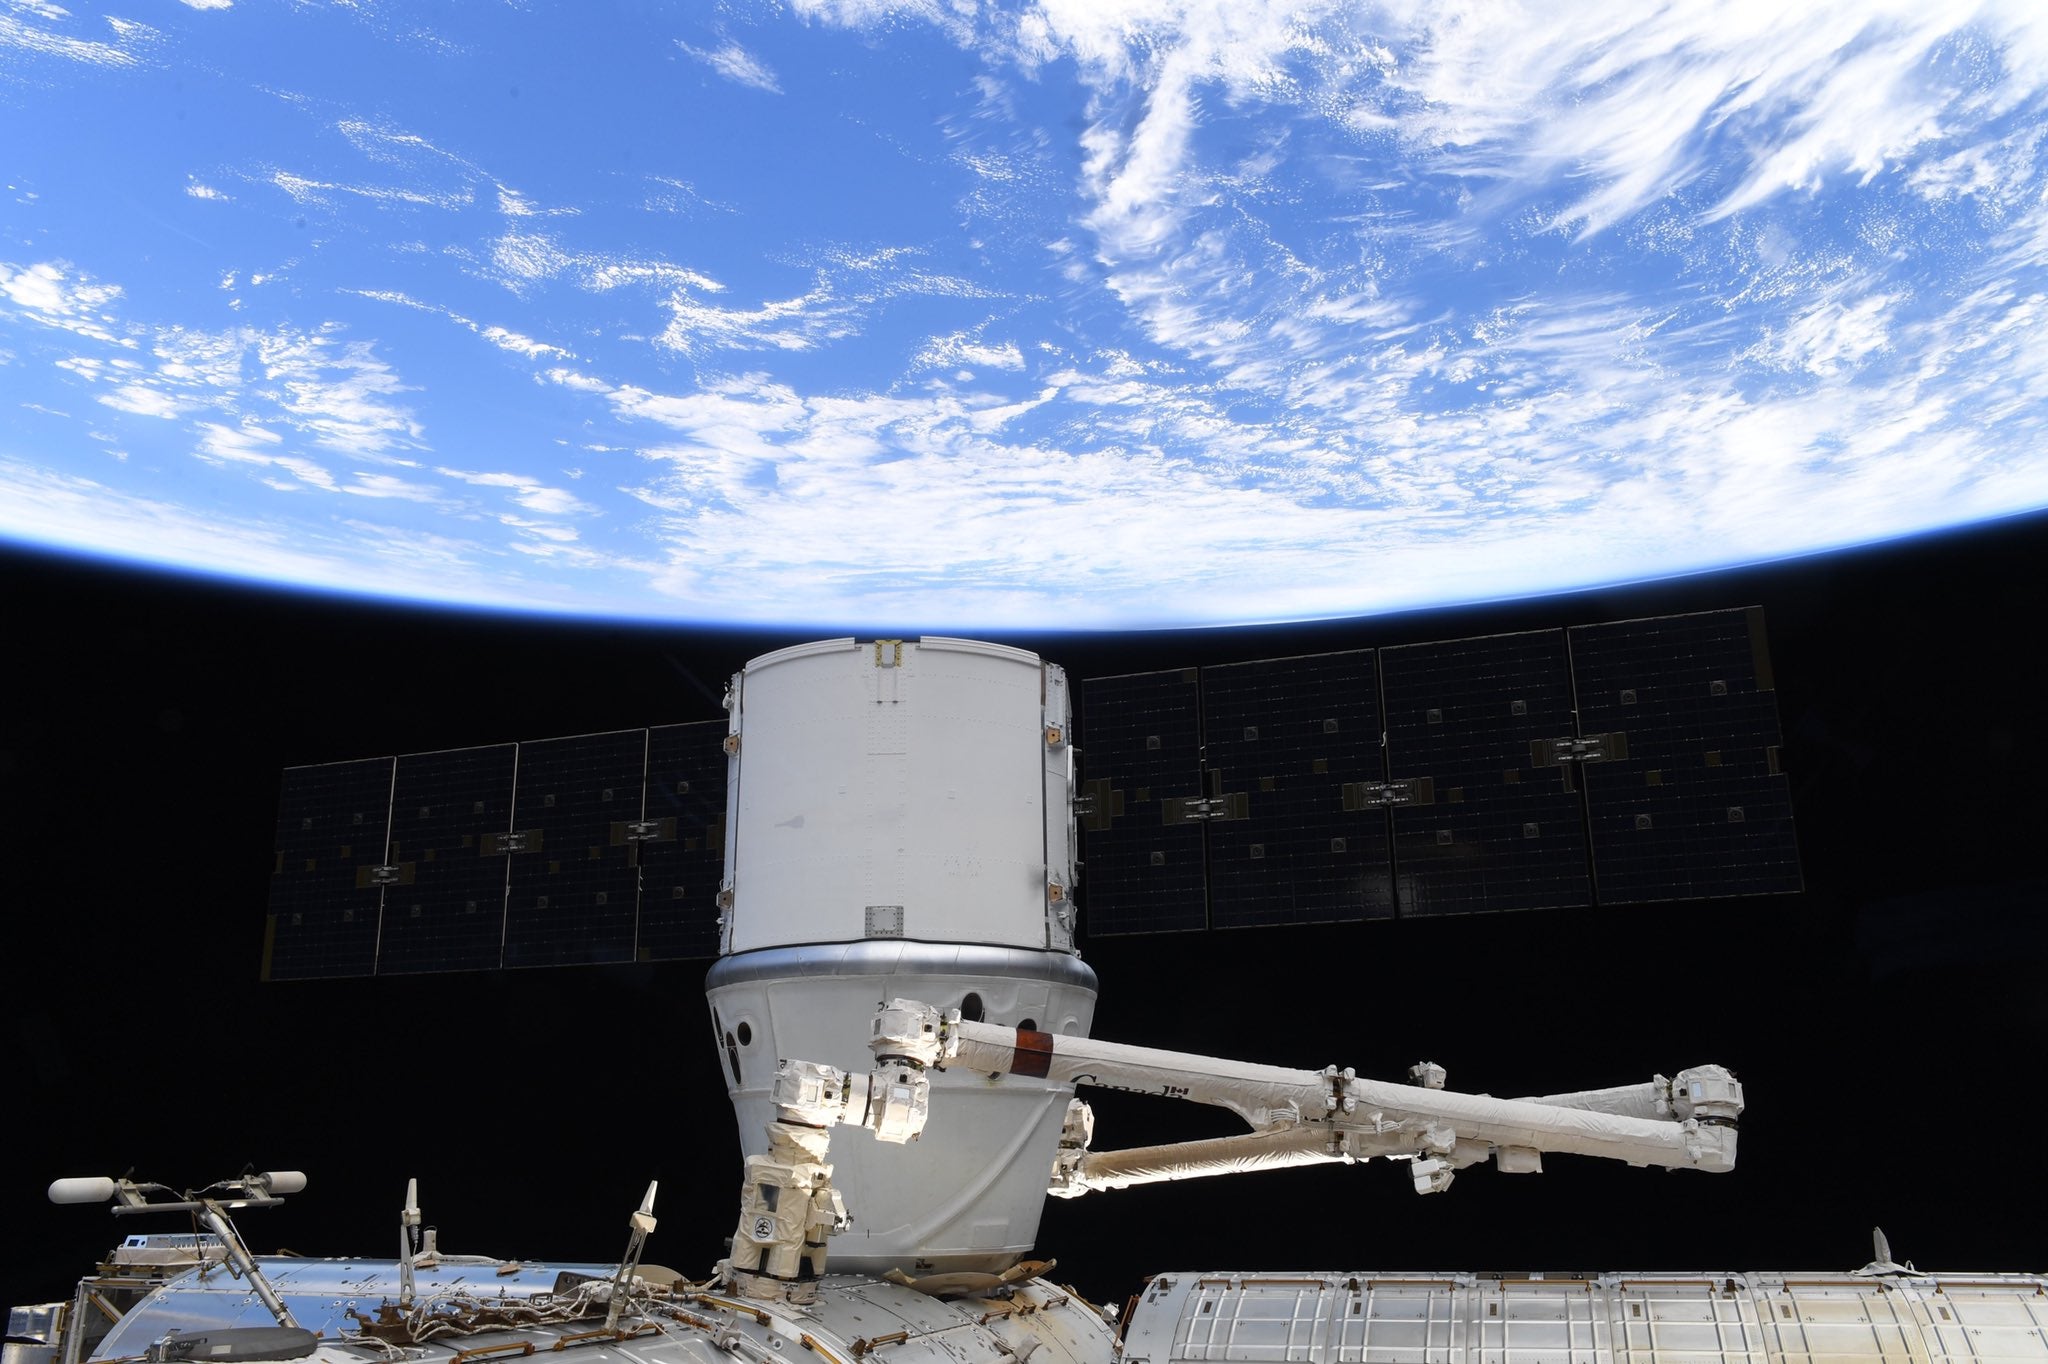 SpaceX Dragon docked to the Space Station today -Expedition 62 NASA Astronauts will unload the cargo